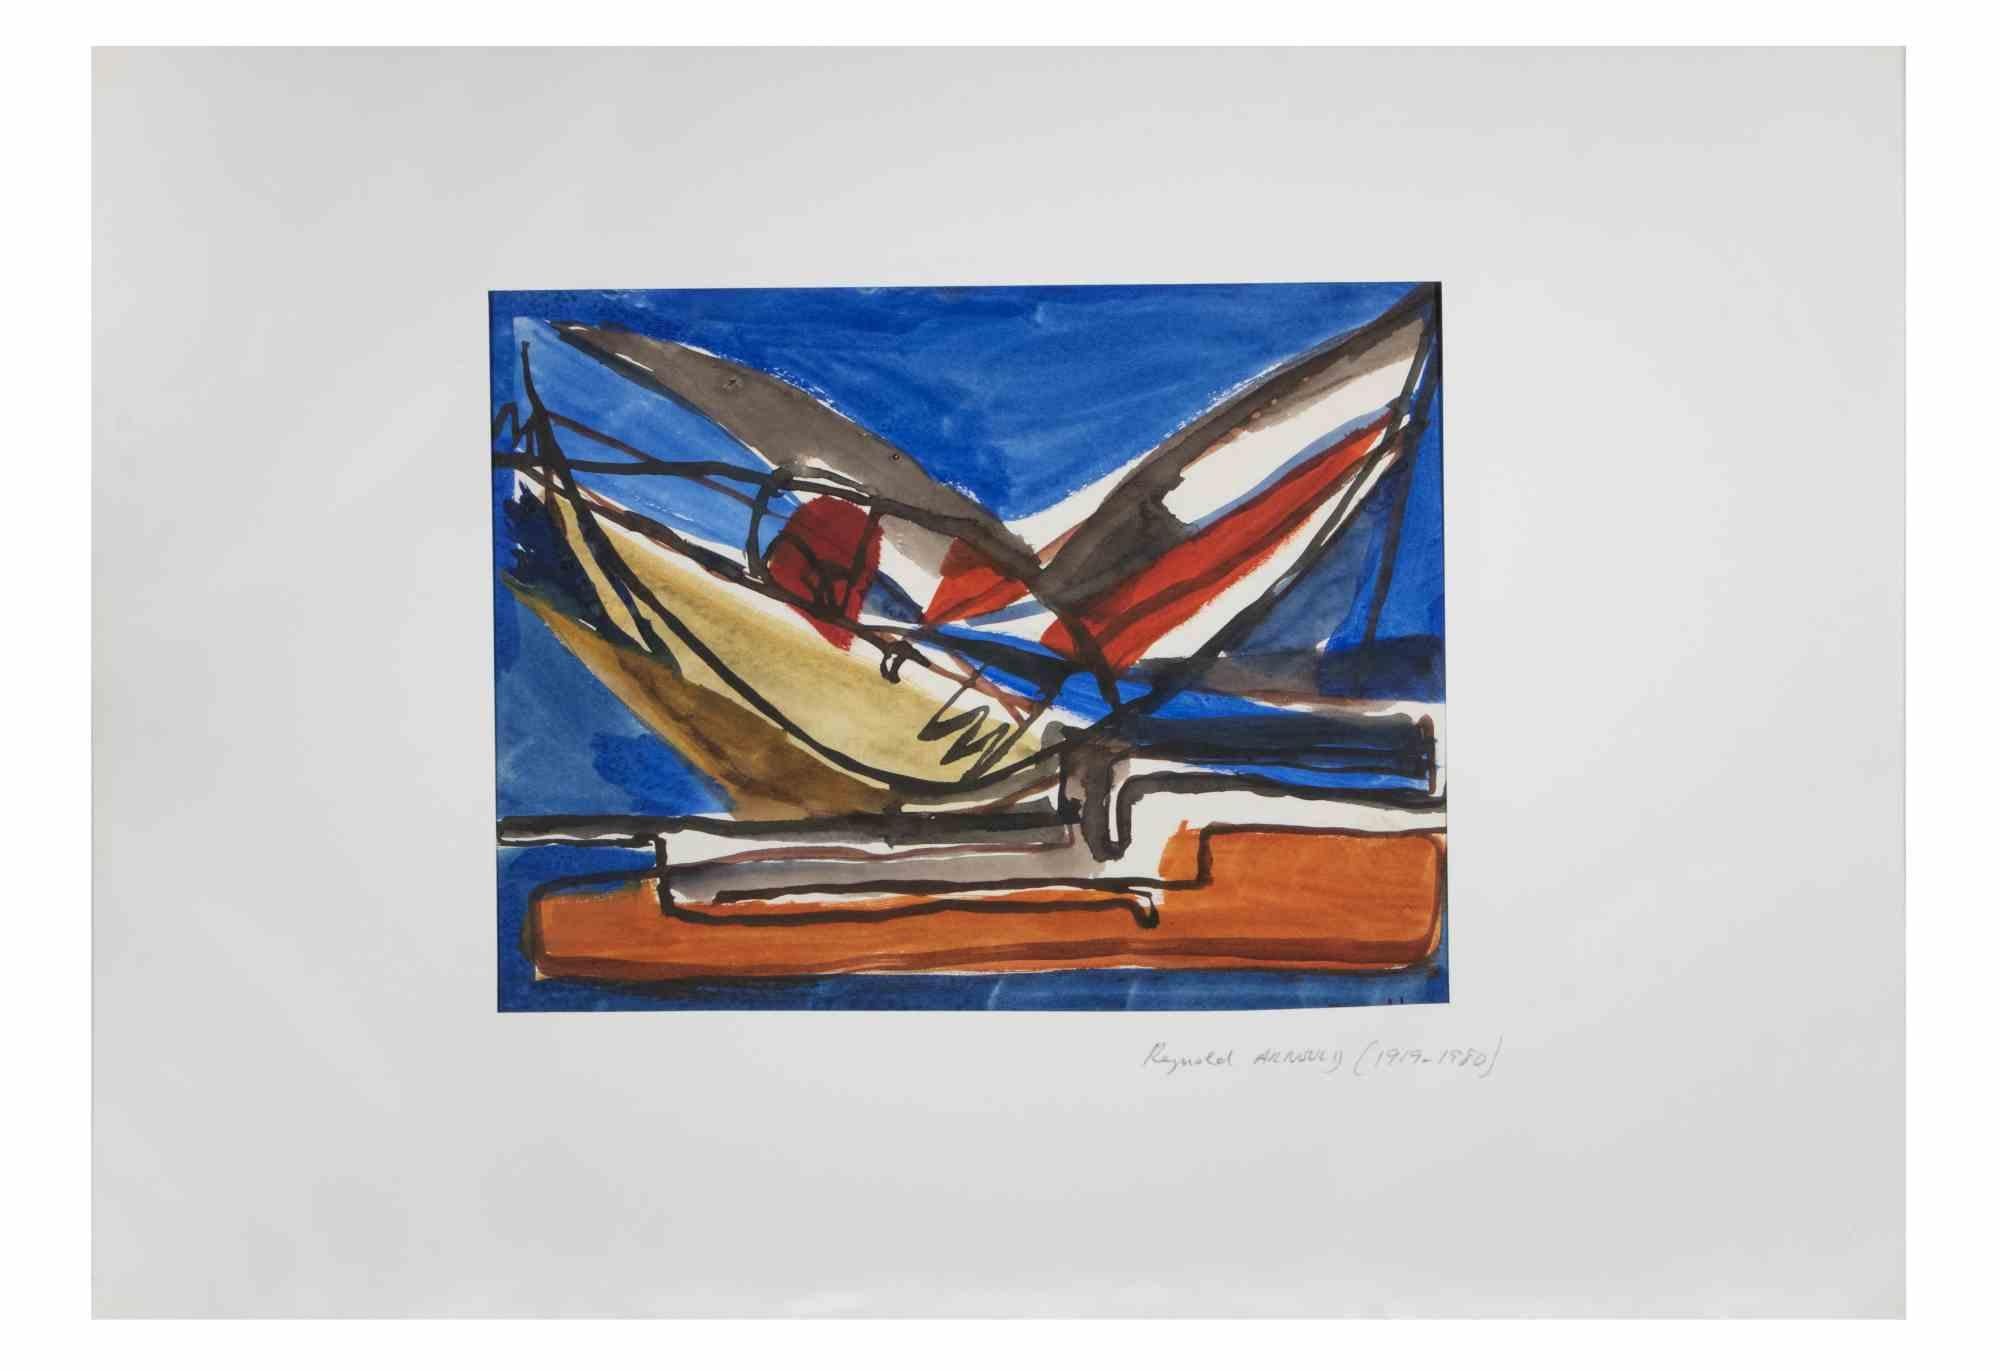 Abstract Composition is a Watercolor artwork realized by Reynold Arnould  (Le Havre 1919 - Parigi 1980) in 1955.

Good condition included a white cardboard passpartout (35x49 cm).

Hand-signed by the artist on the lower right corner.

Reynold